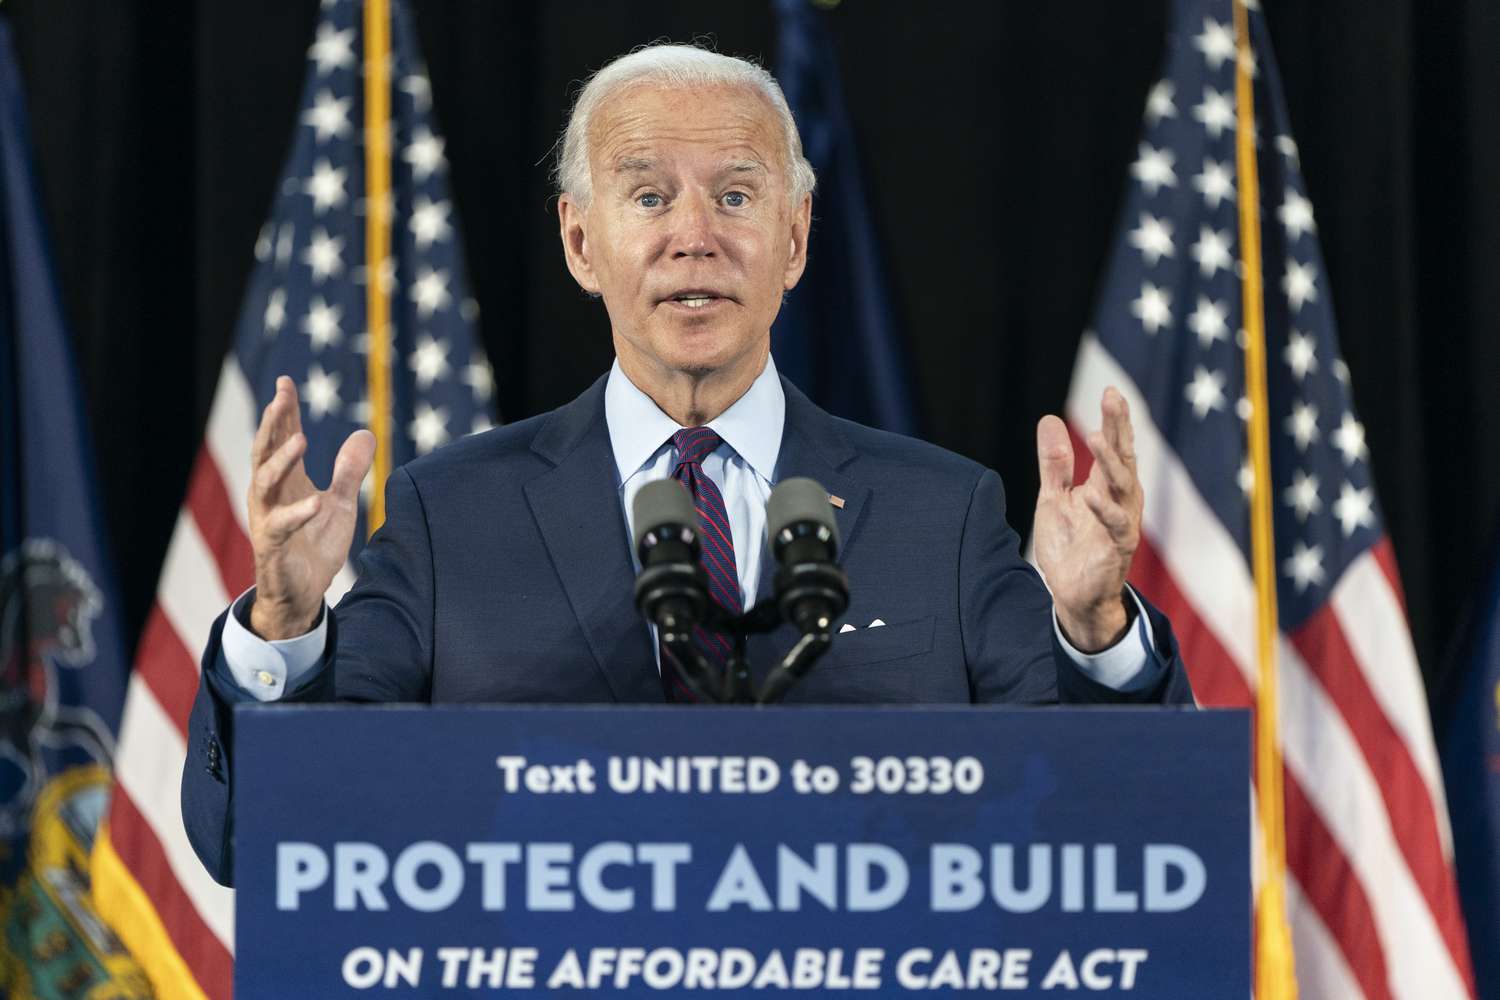 Joe Biden speaking about health care reform at a campaign event.